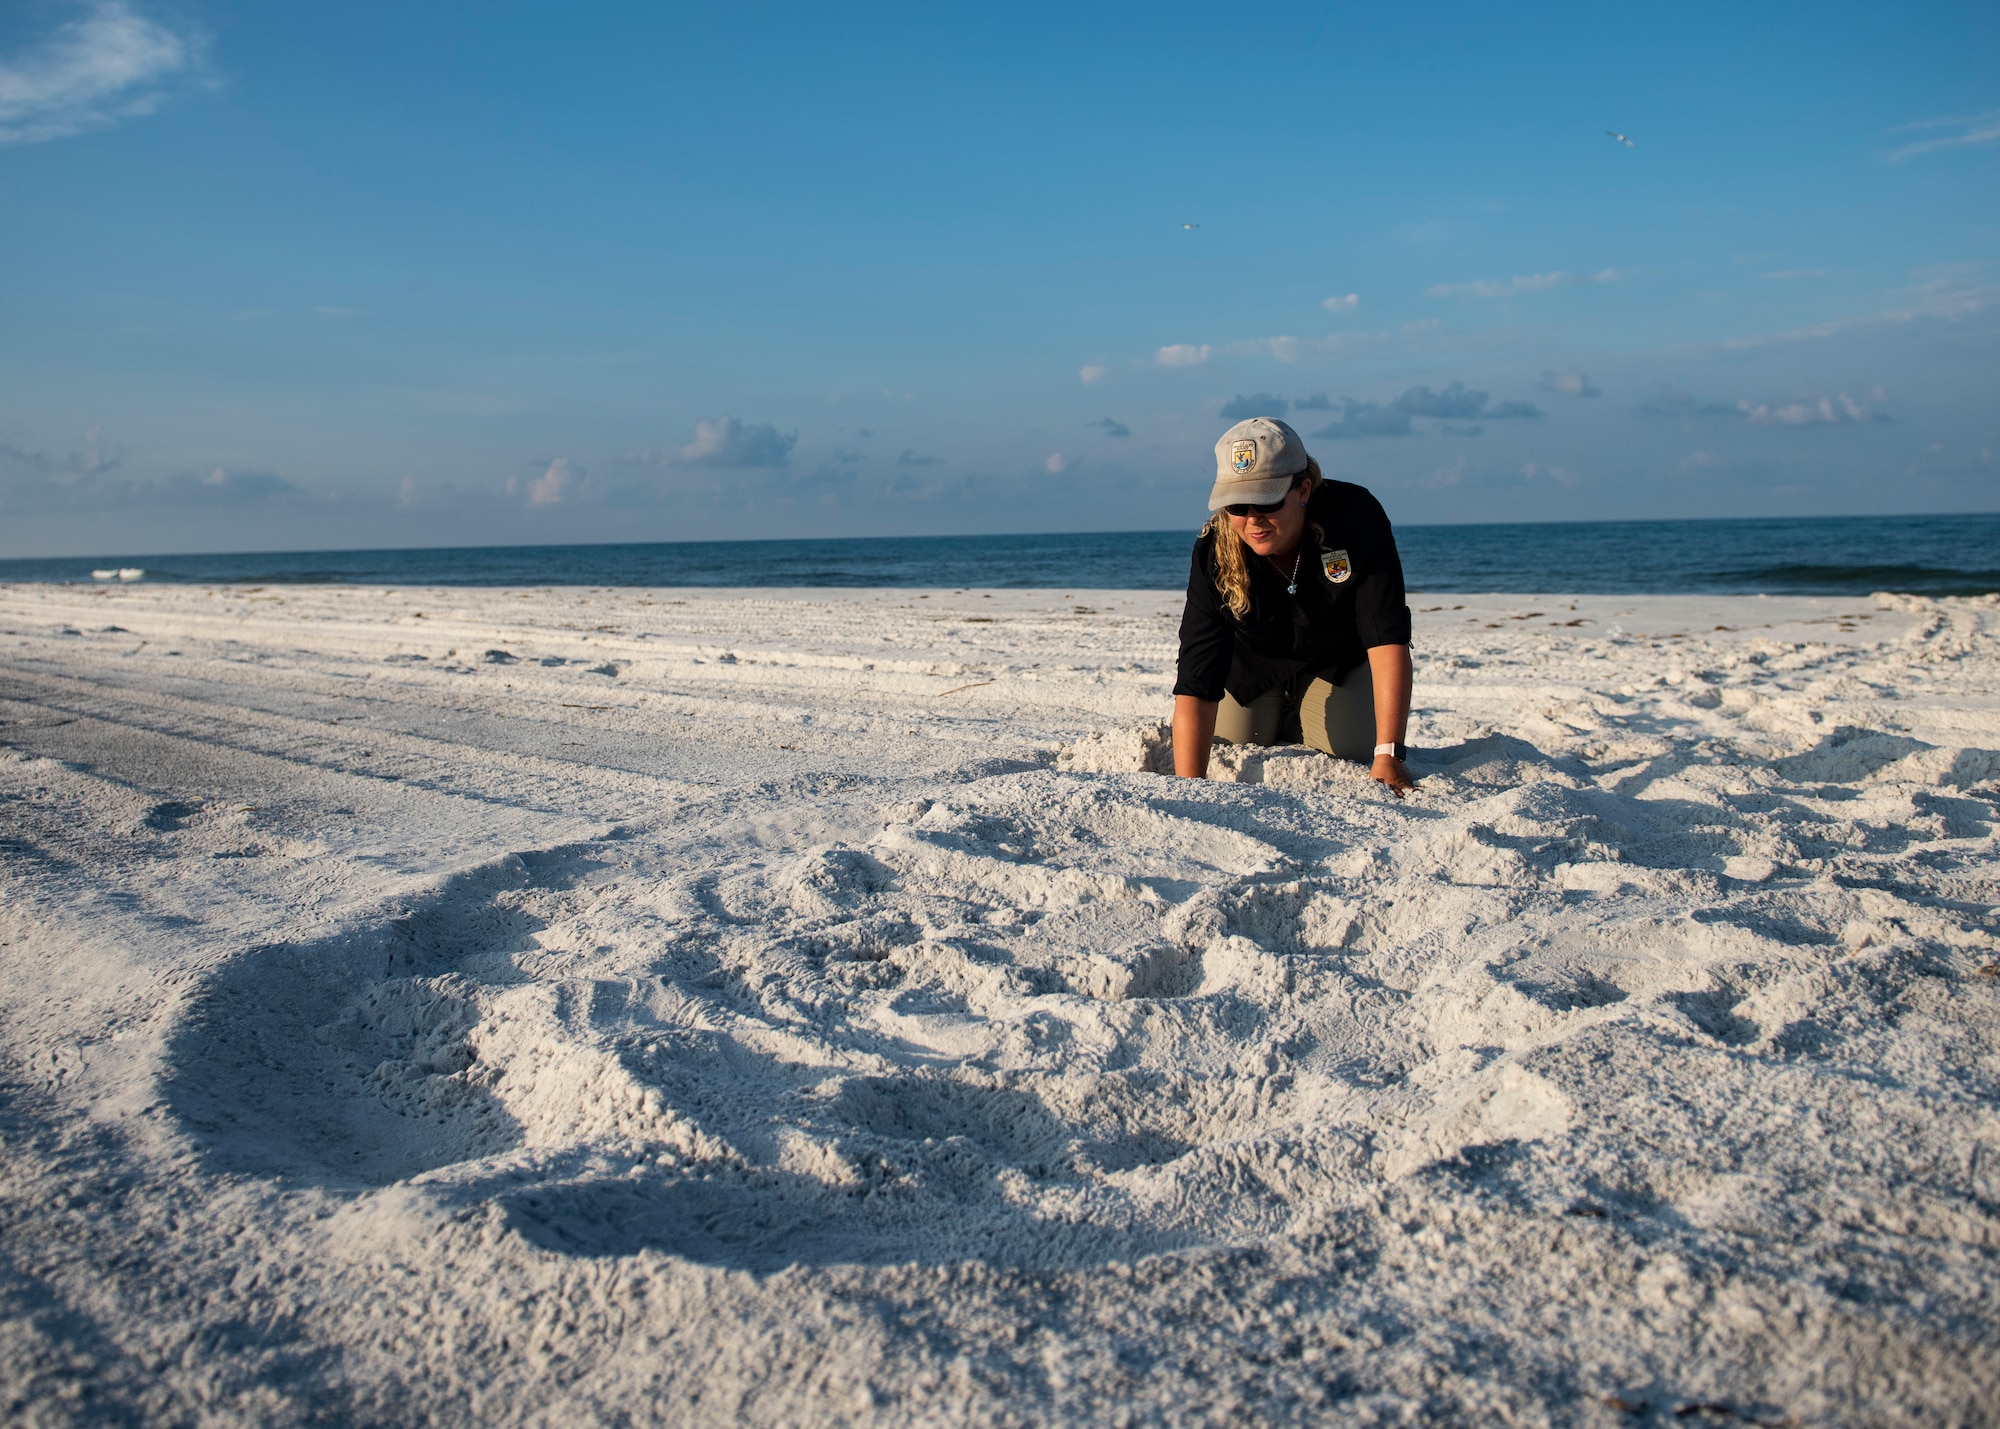 Danielle Bumgardner, U.S. Fish and Wildlife Services biologist, verifies the location of sea turtle eggs in a nest on the beach at Tyndall Air Force Base, Florida, June 5, 2019.